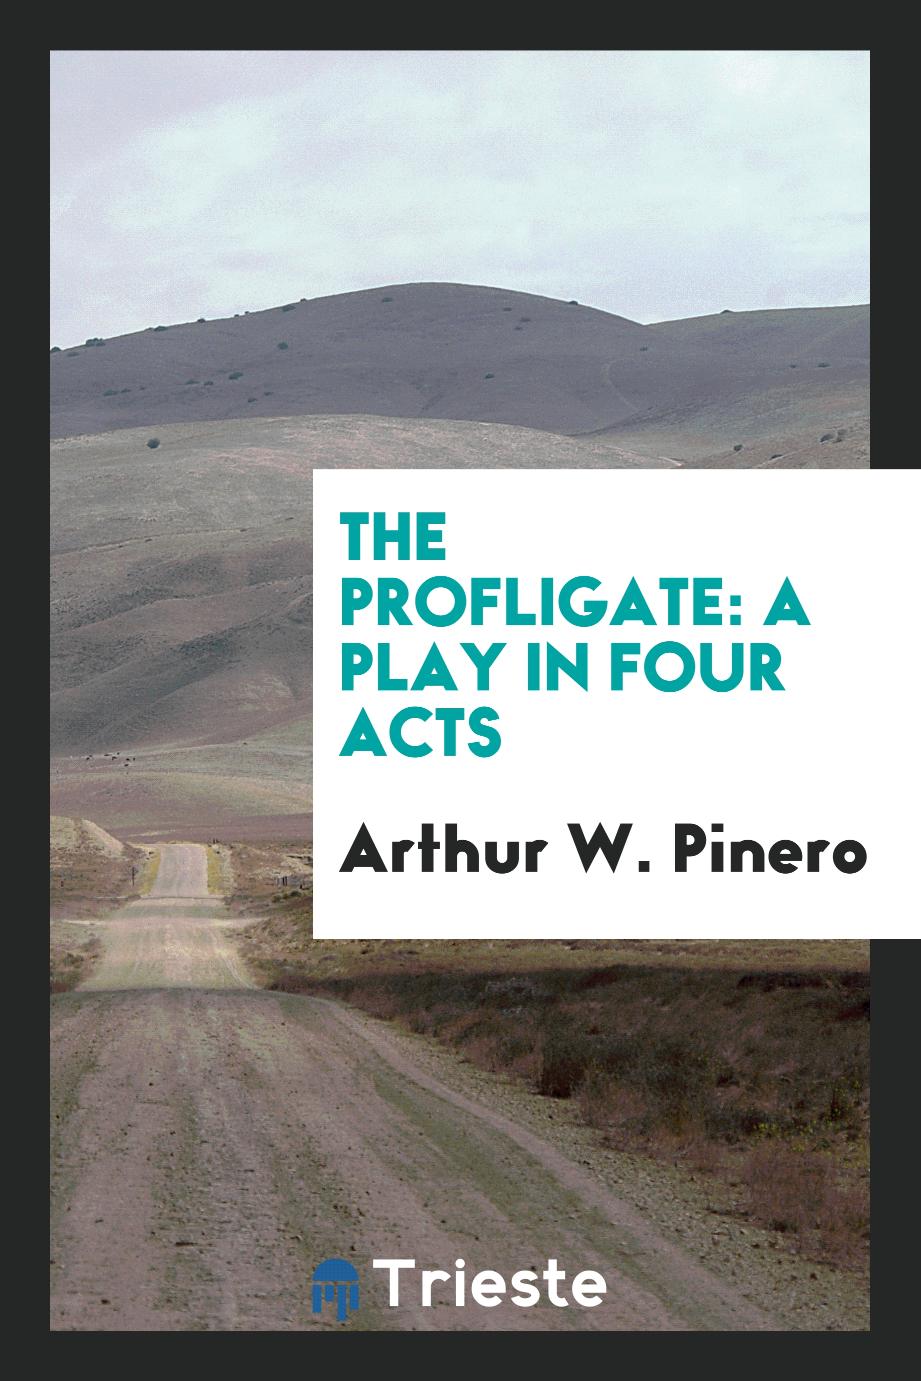 The Profligate: A Play in Four Acts